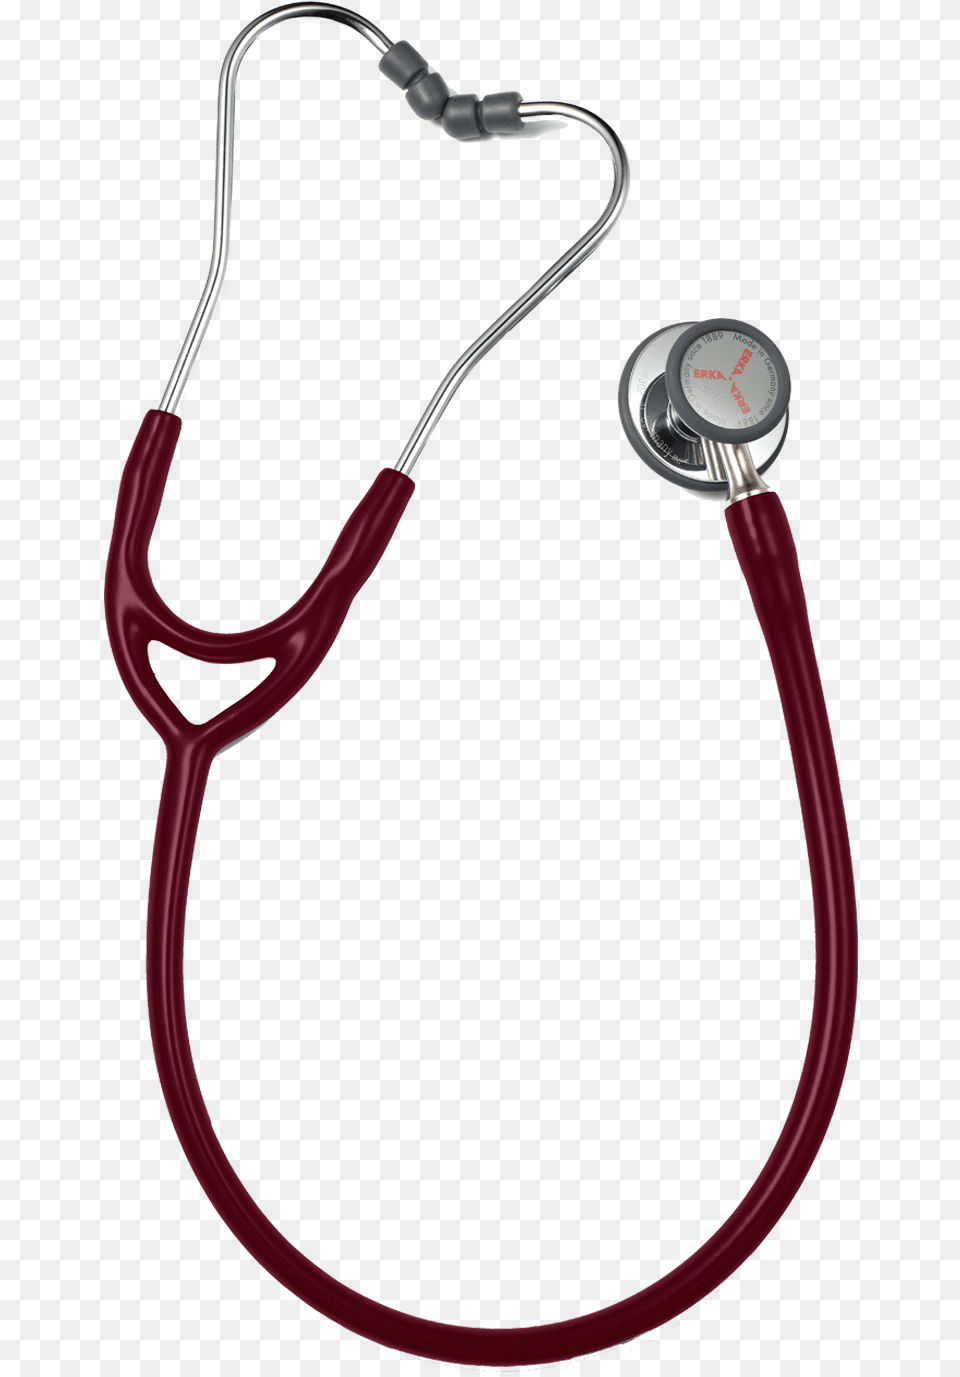 Transparent Stethescope Erka Finesse 2 Stethoscope, Smoke Pipe Free Png